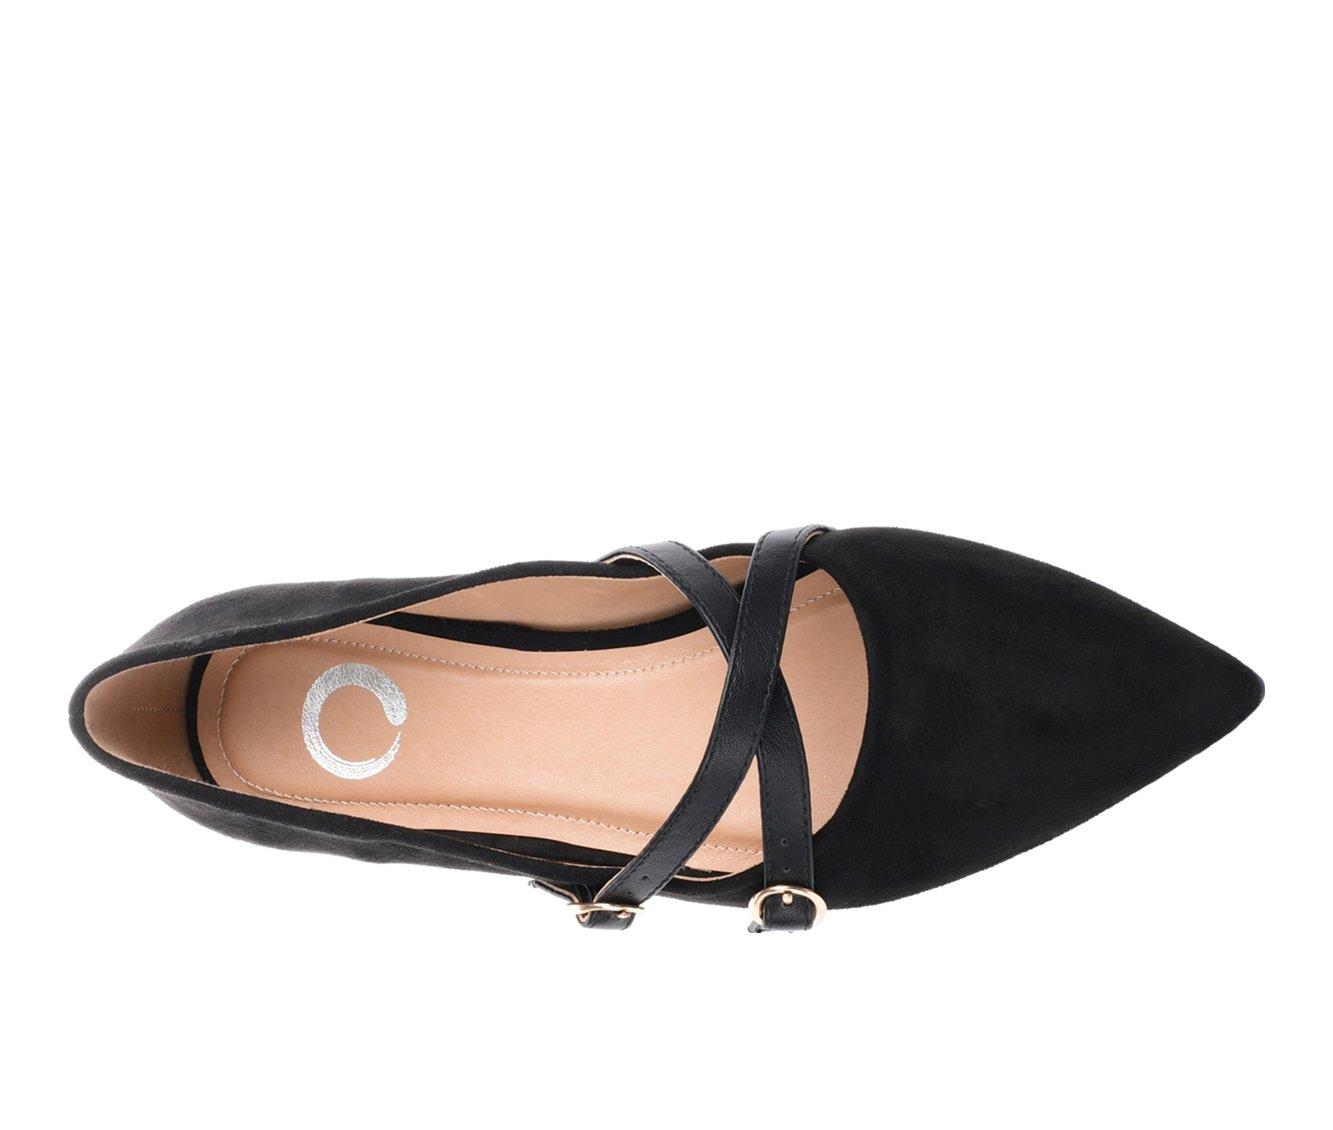 Women's Journee Collection Patricia Flats